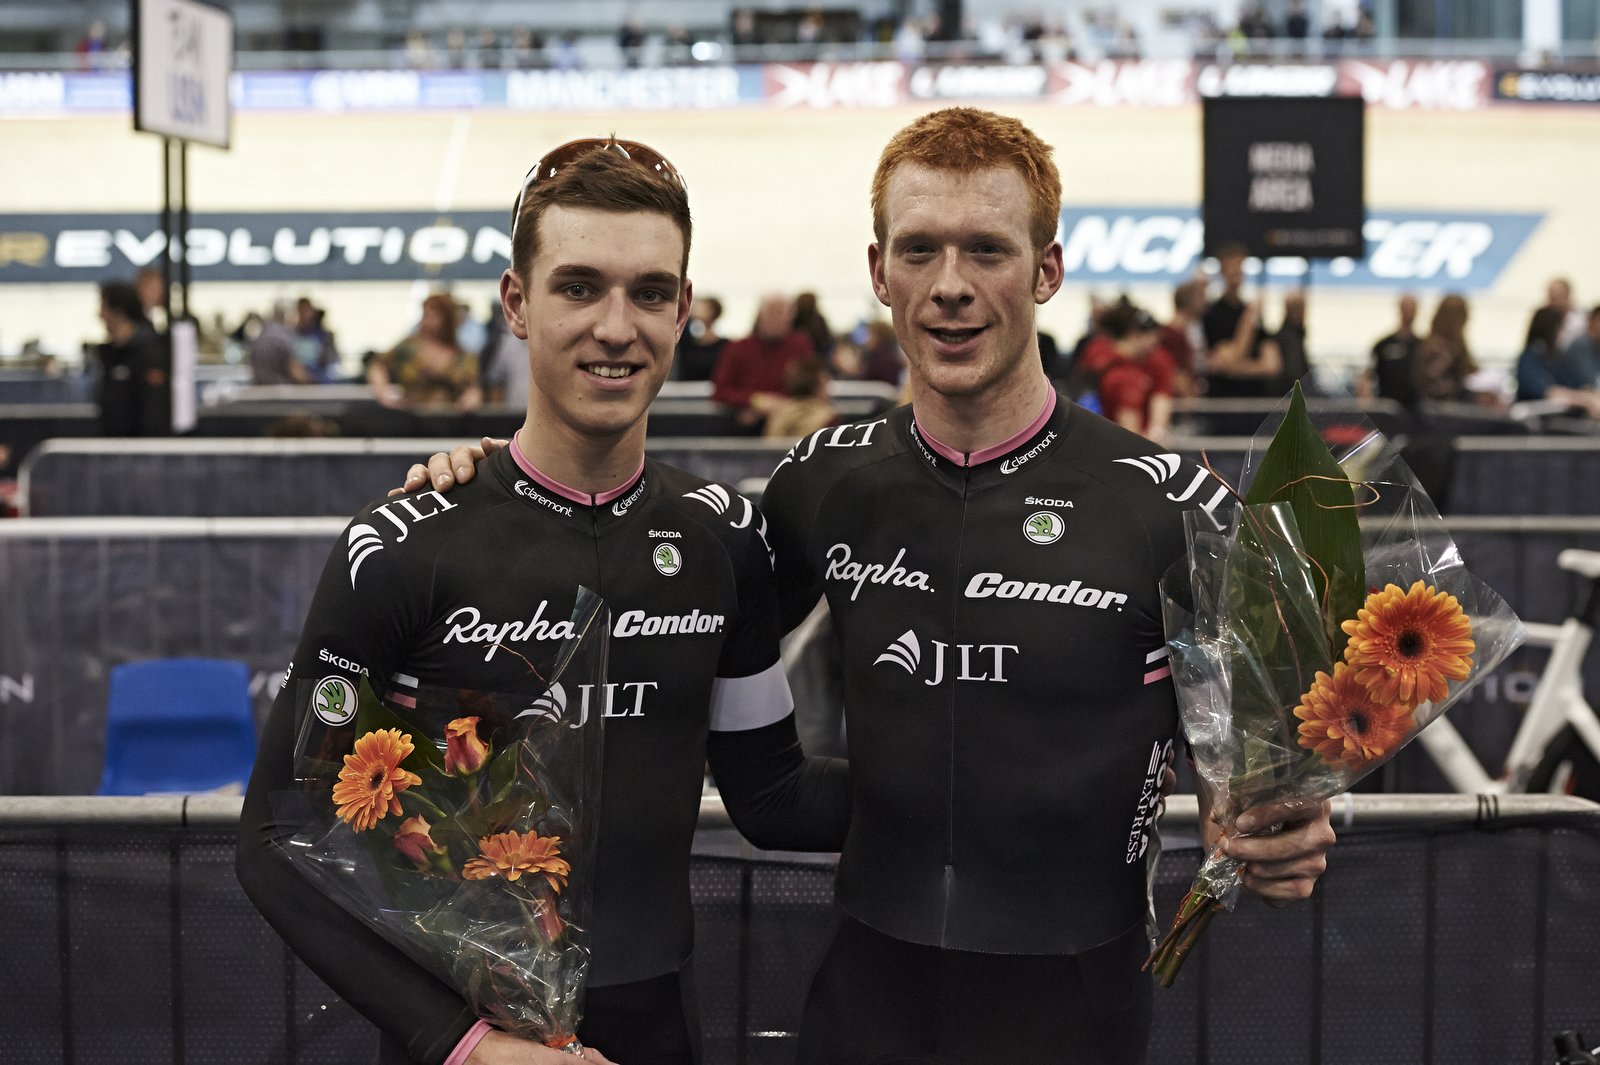 Ollie Wood and Ed Clancy were on world record breaking form in Manchester ©Revolution Series